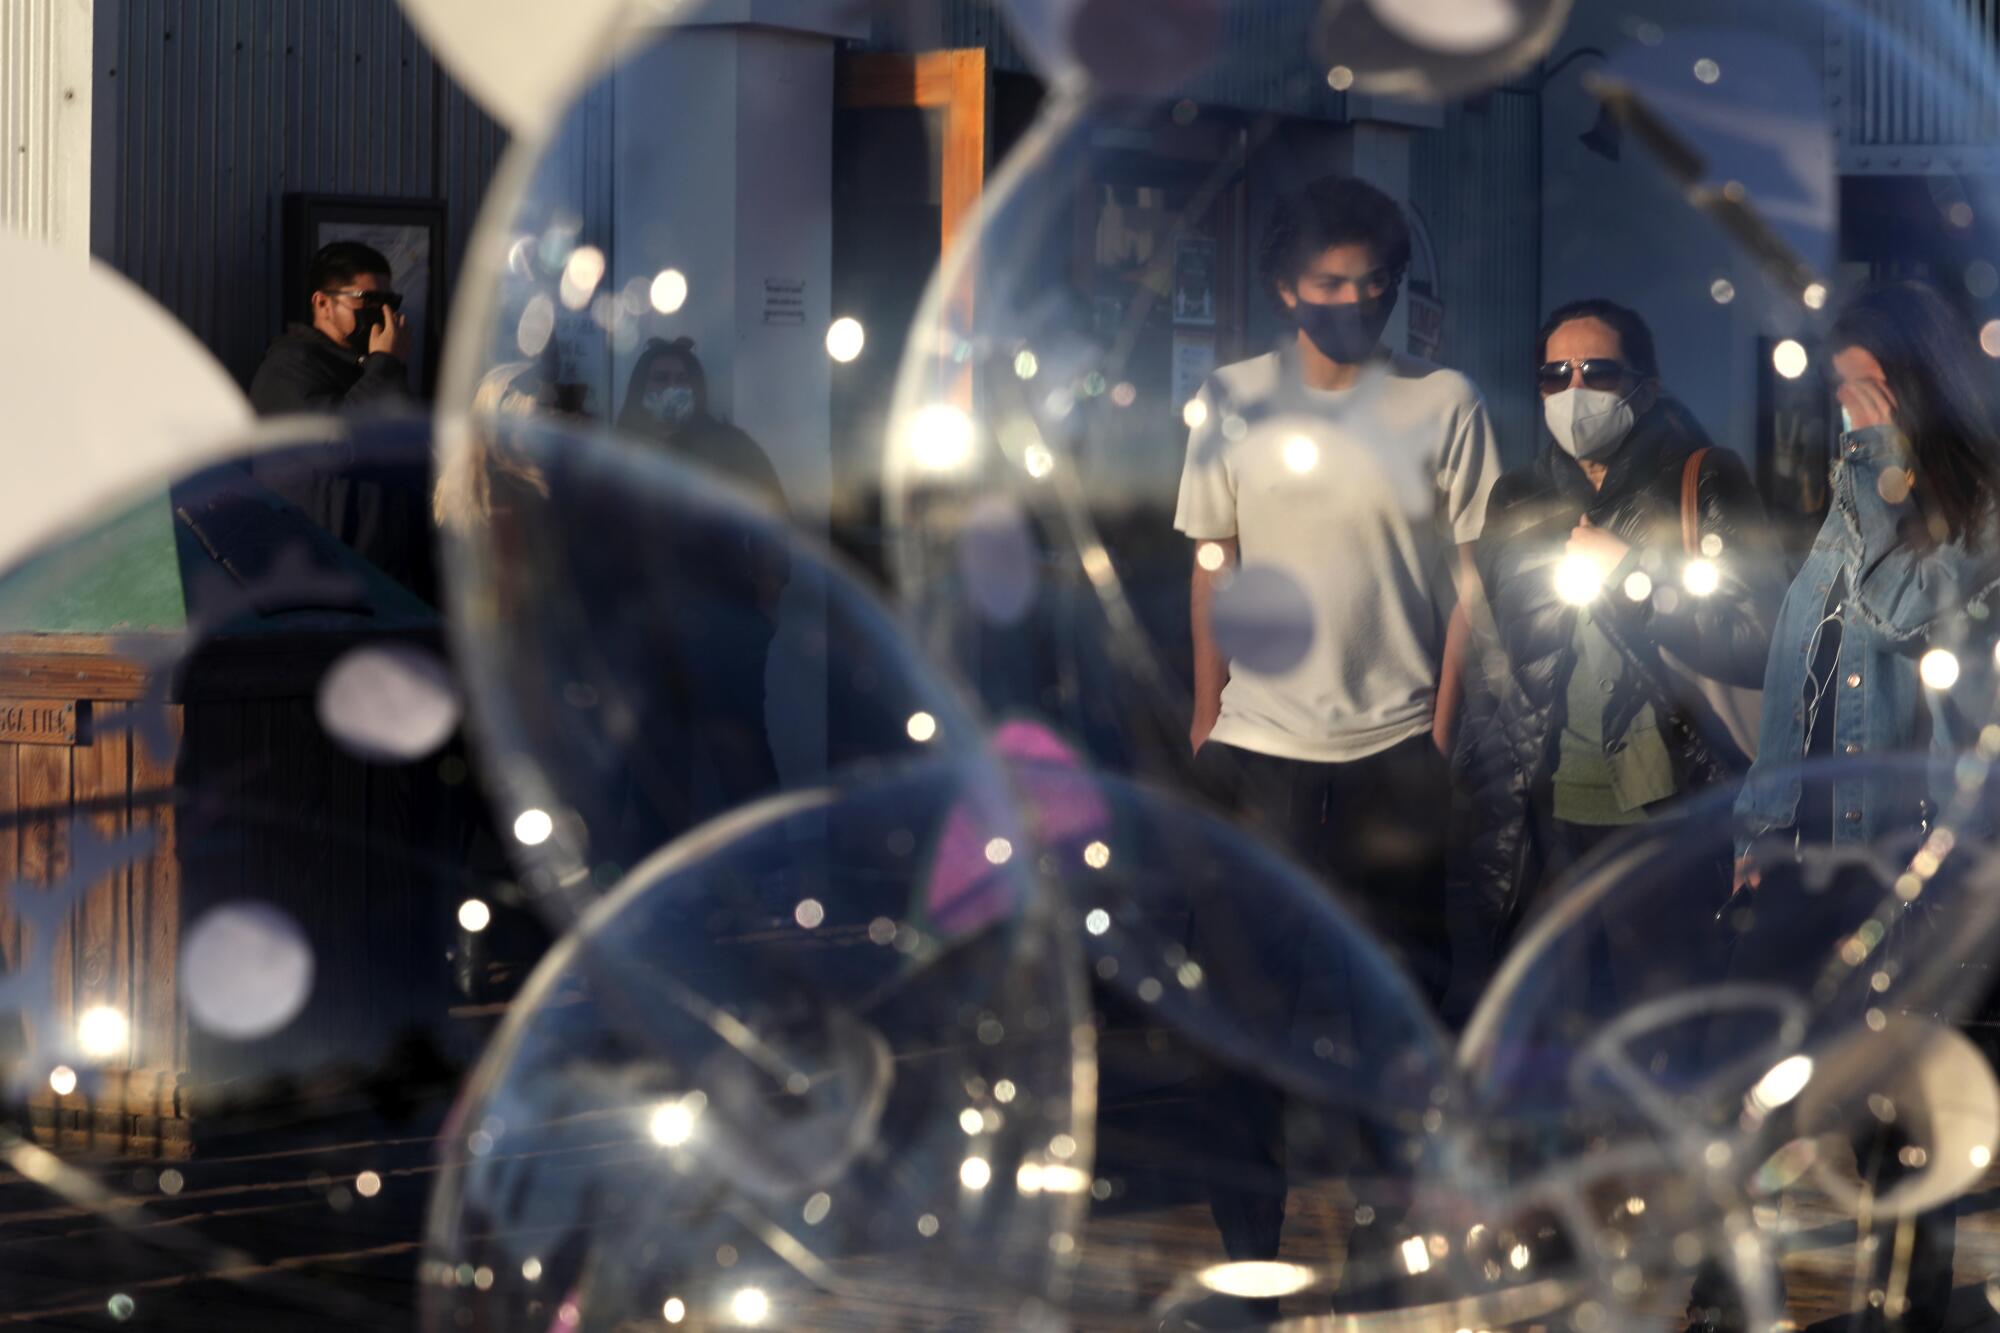 A family wearing masks walks behind a cluster of transparent balloons.